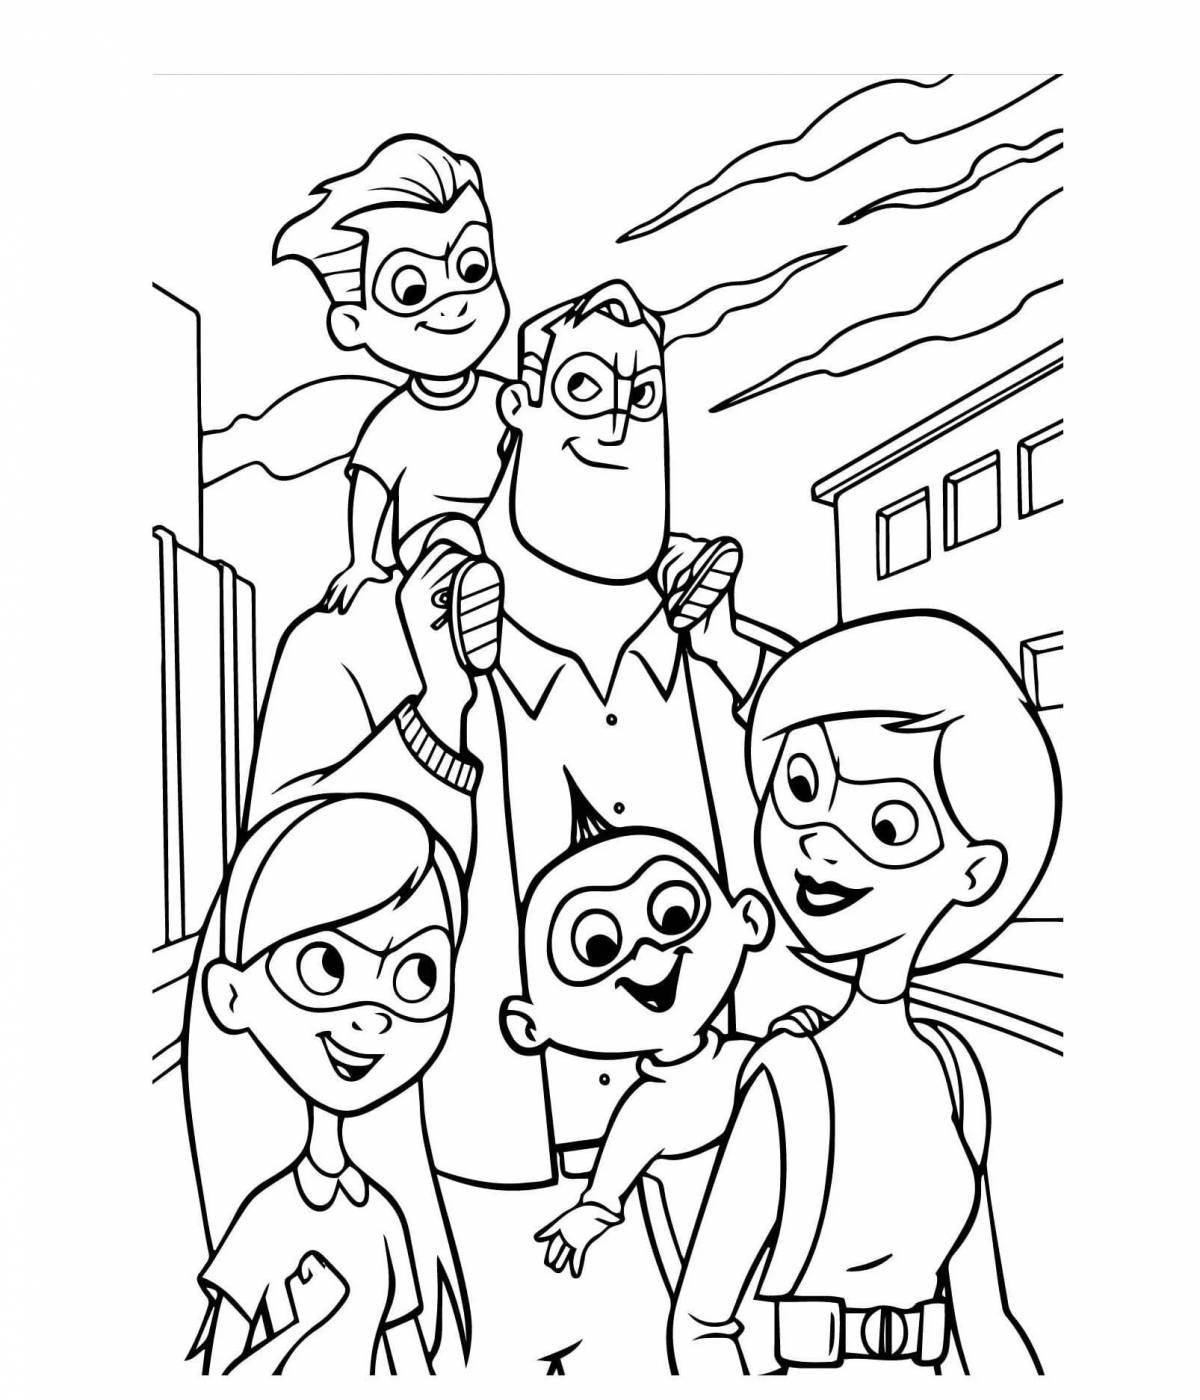 Funny family coloring book